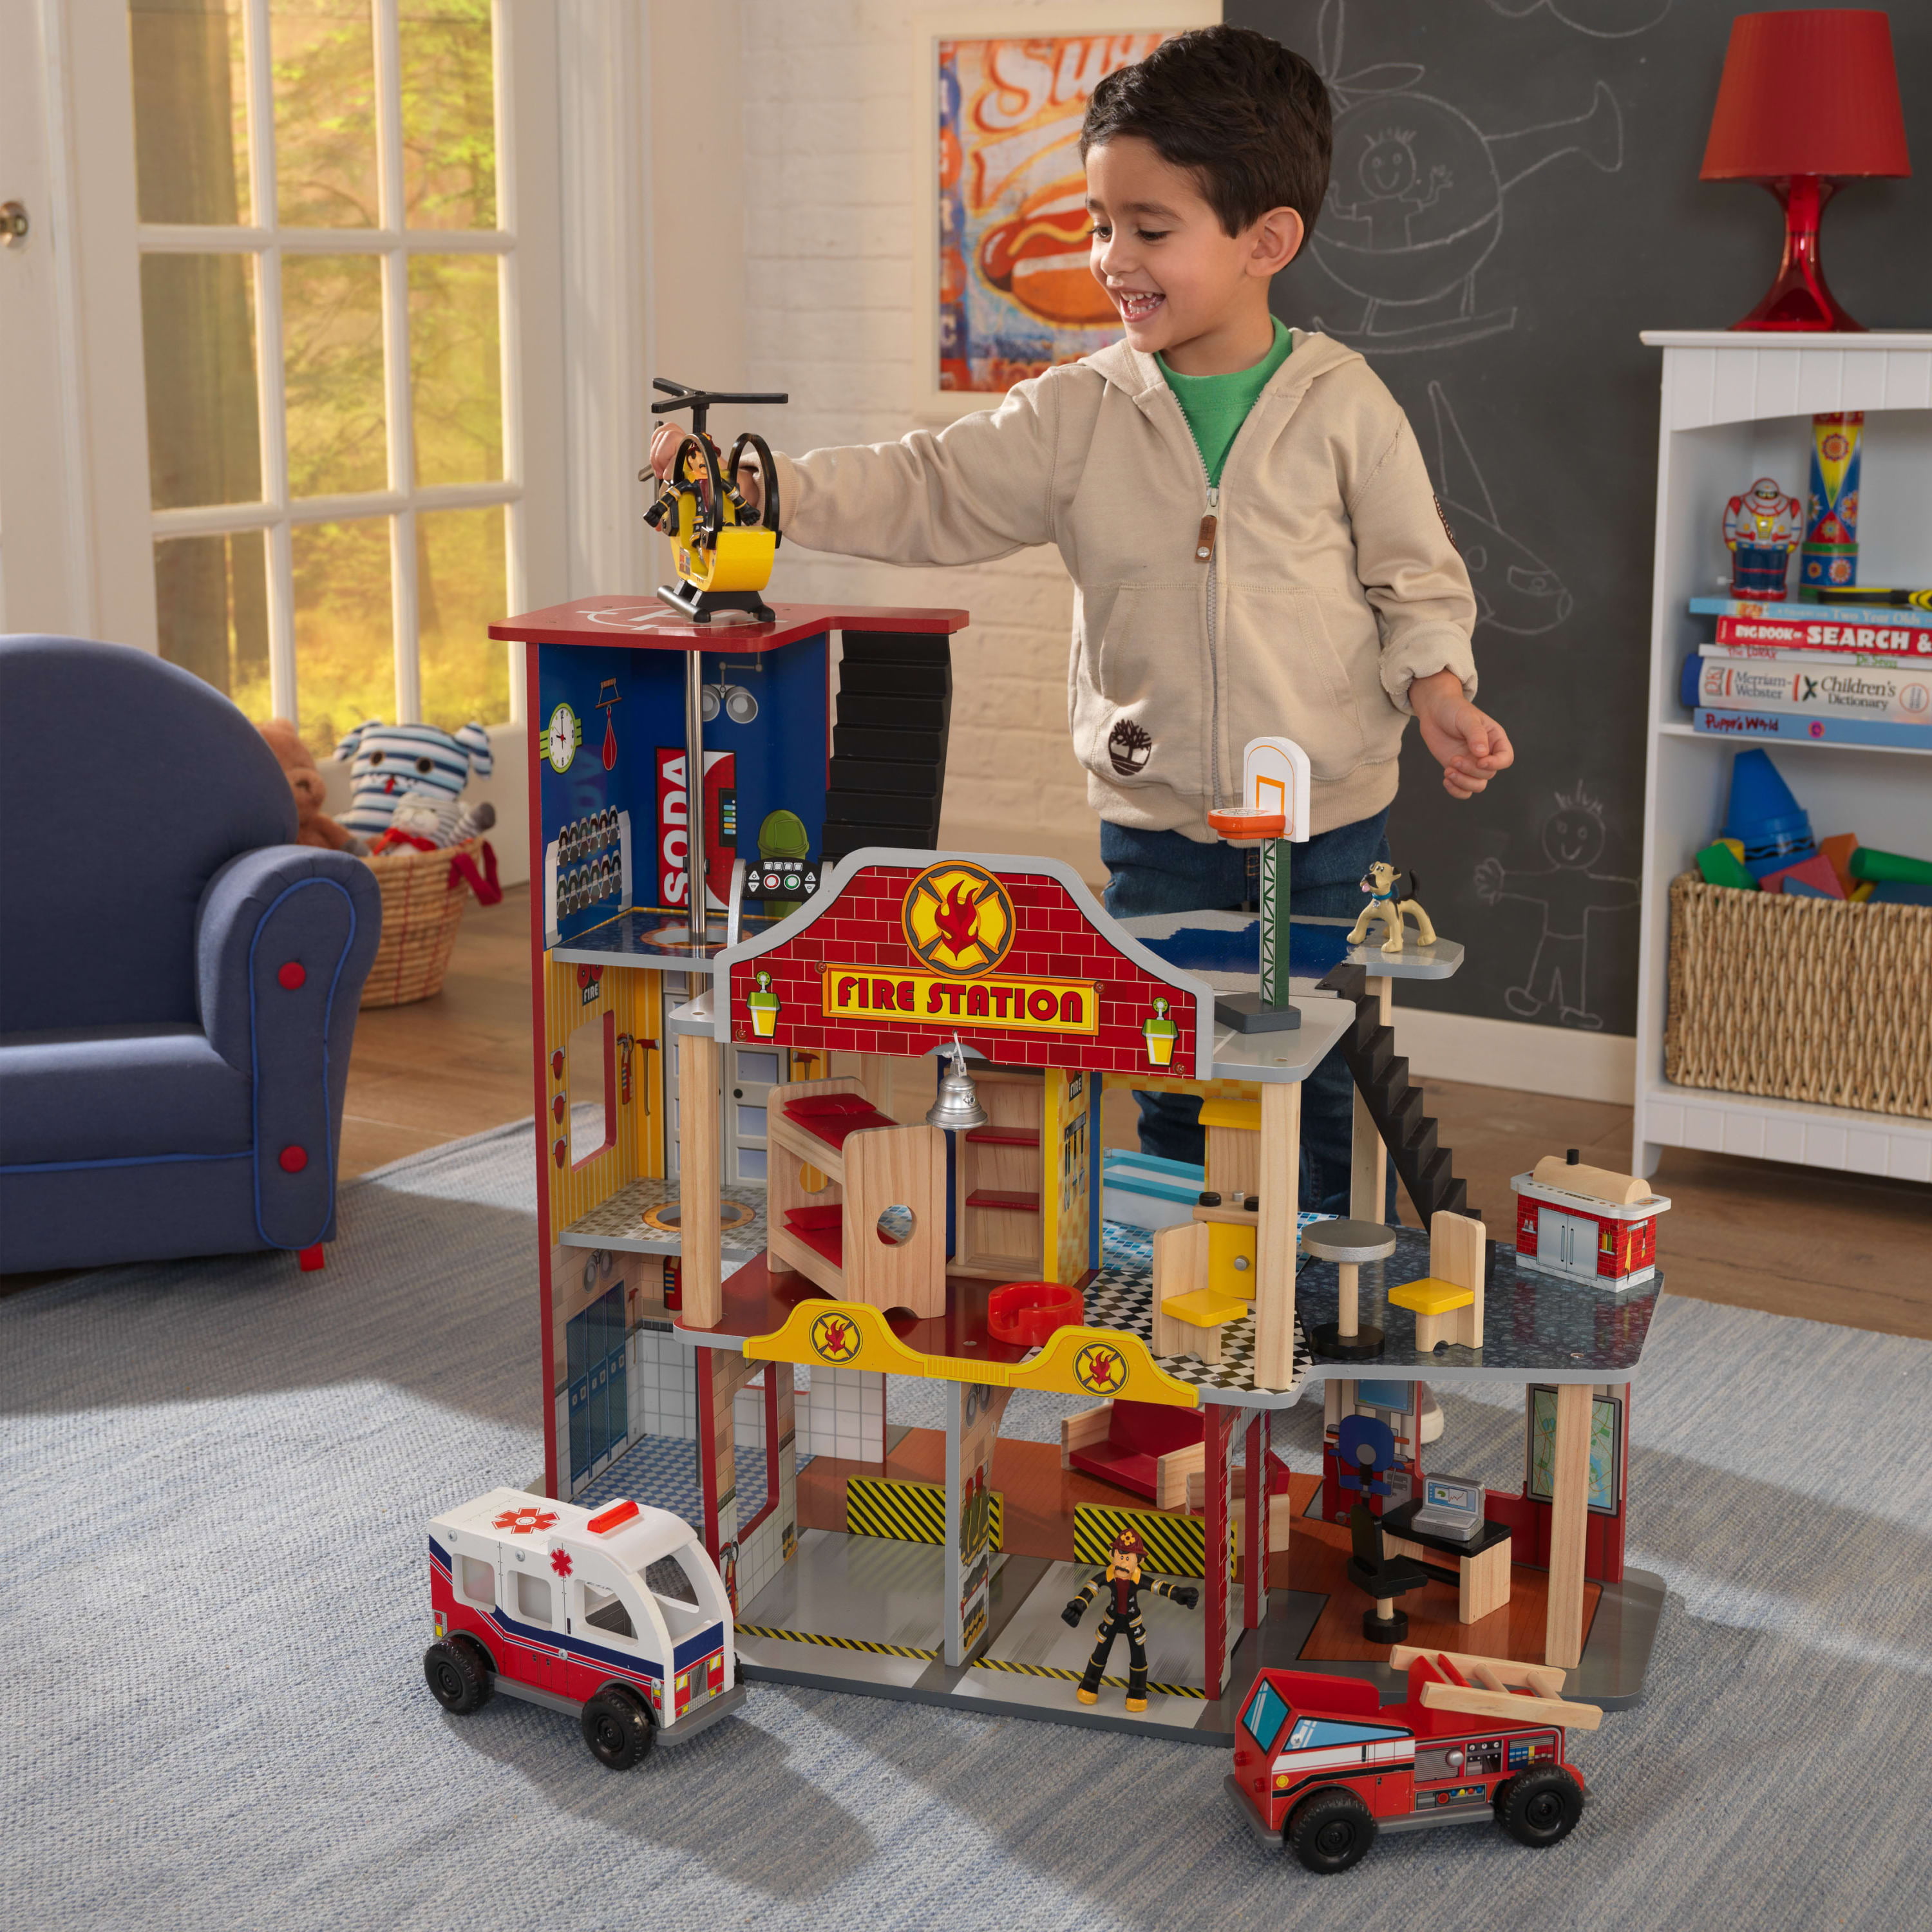 KidKraft Deluxe Wood Rescue Play Set with Ambulance, Fire Truck, Helicopter & 27 Pieces - image 2 of 7